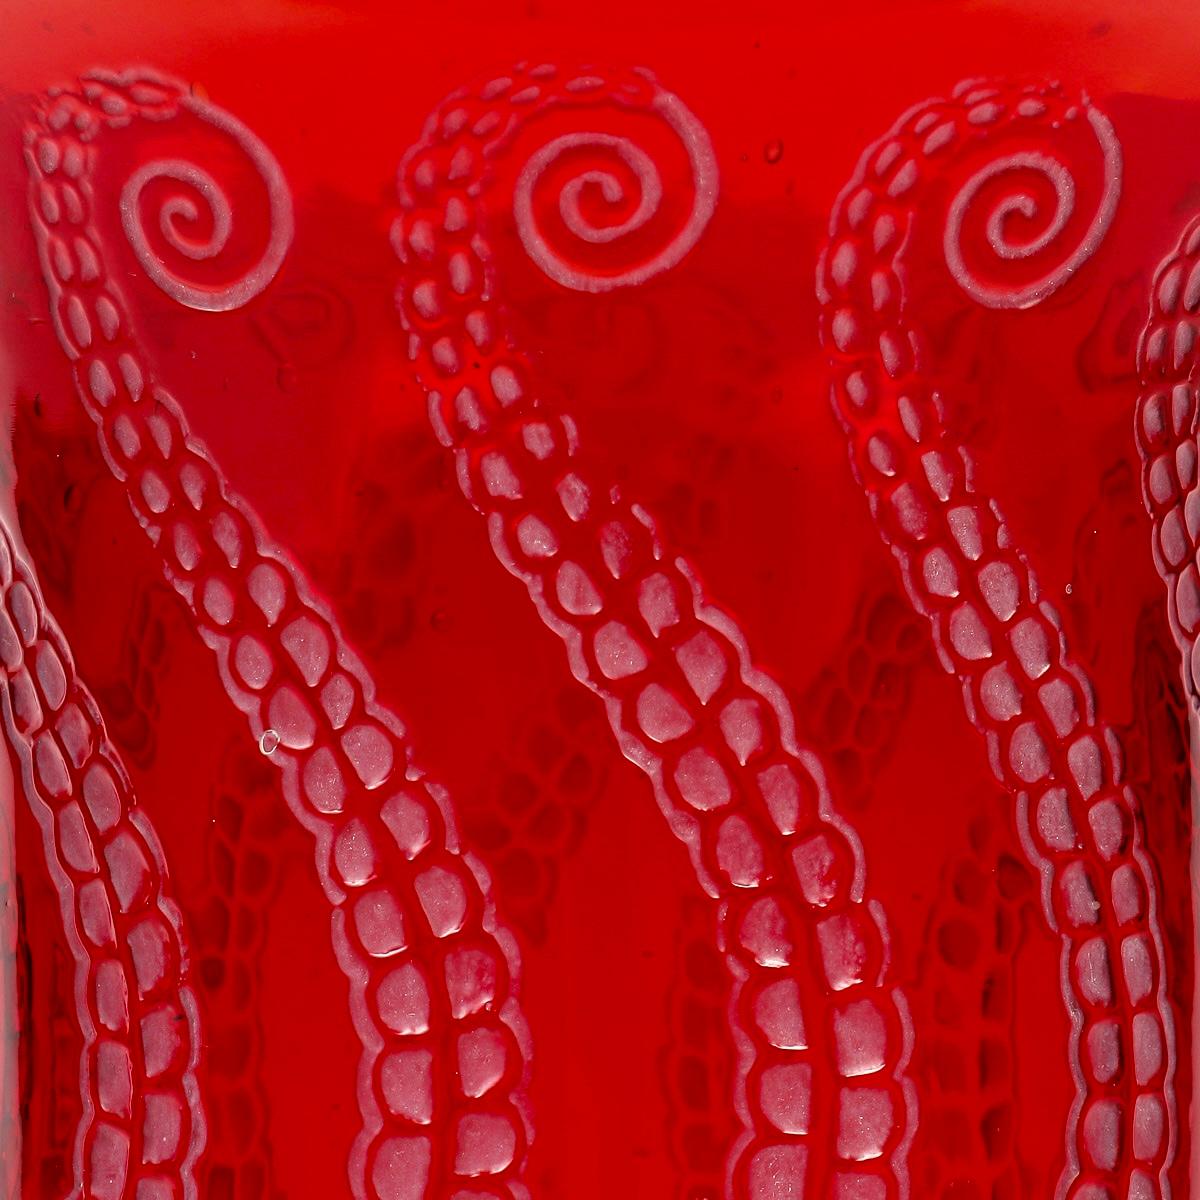 French 1921 Rene Lalique Vase Medusa Cased Red Glass with White Patina